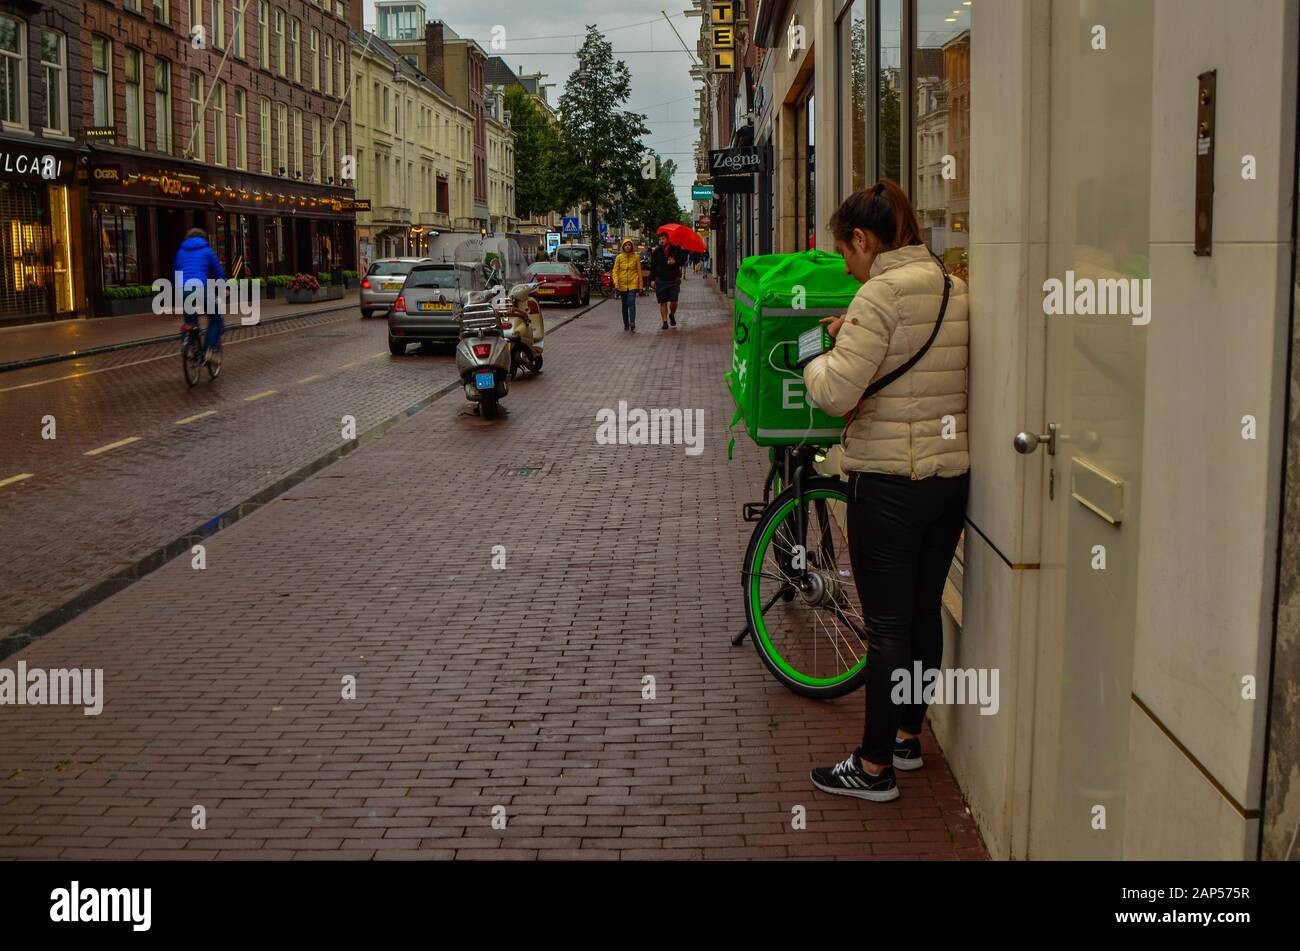 Amsterdam, Holland, August 2019. A rainy day in the shopping street. An uber eat worker consults the smartphone, next to the bike with the showy green Stock Photo